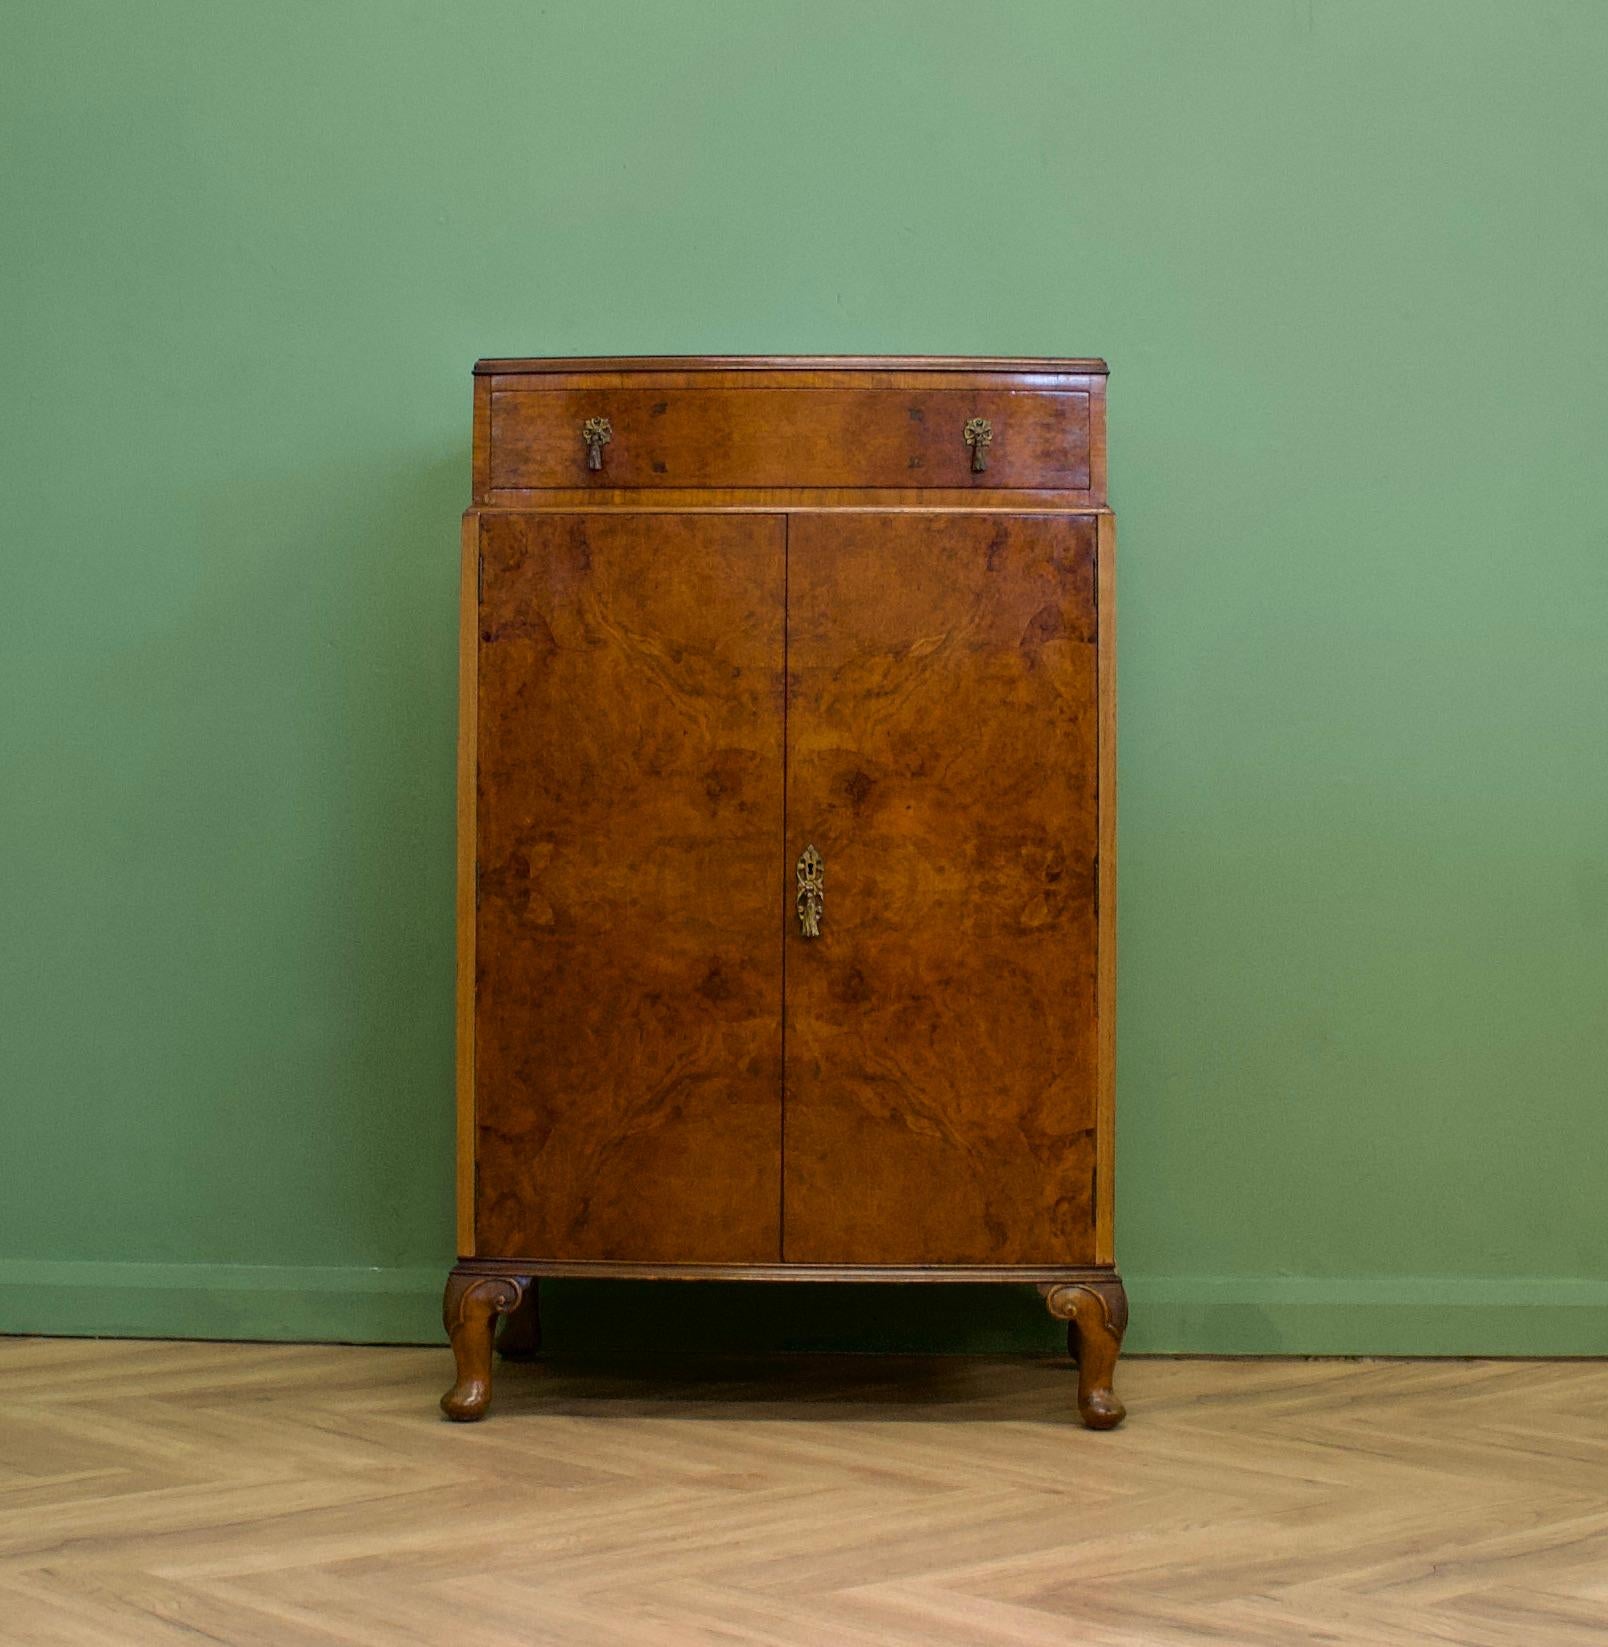 An impressive quality, 1930's style burr walnut linen cabinet - perfect for a maximalist interior - circa 1930's
The walnut veneers have been beautifully quarter matched on the doors and inlaid


The interior of the top cupboard is fitted out with